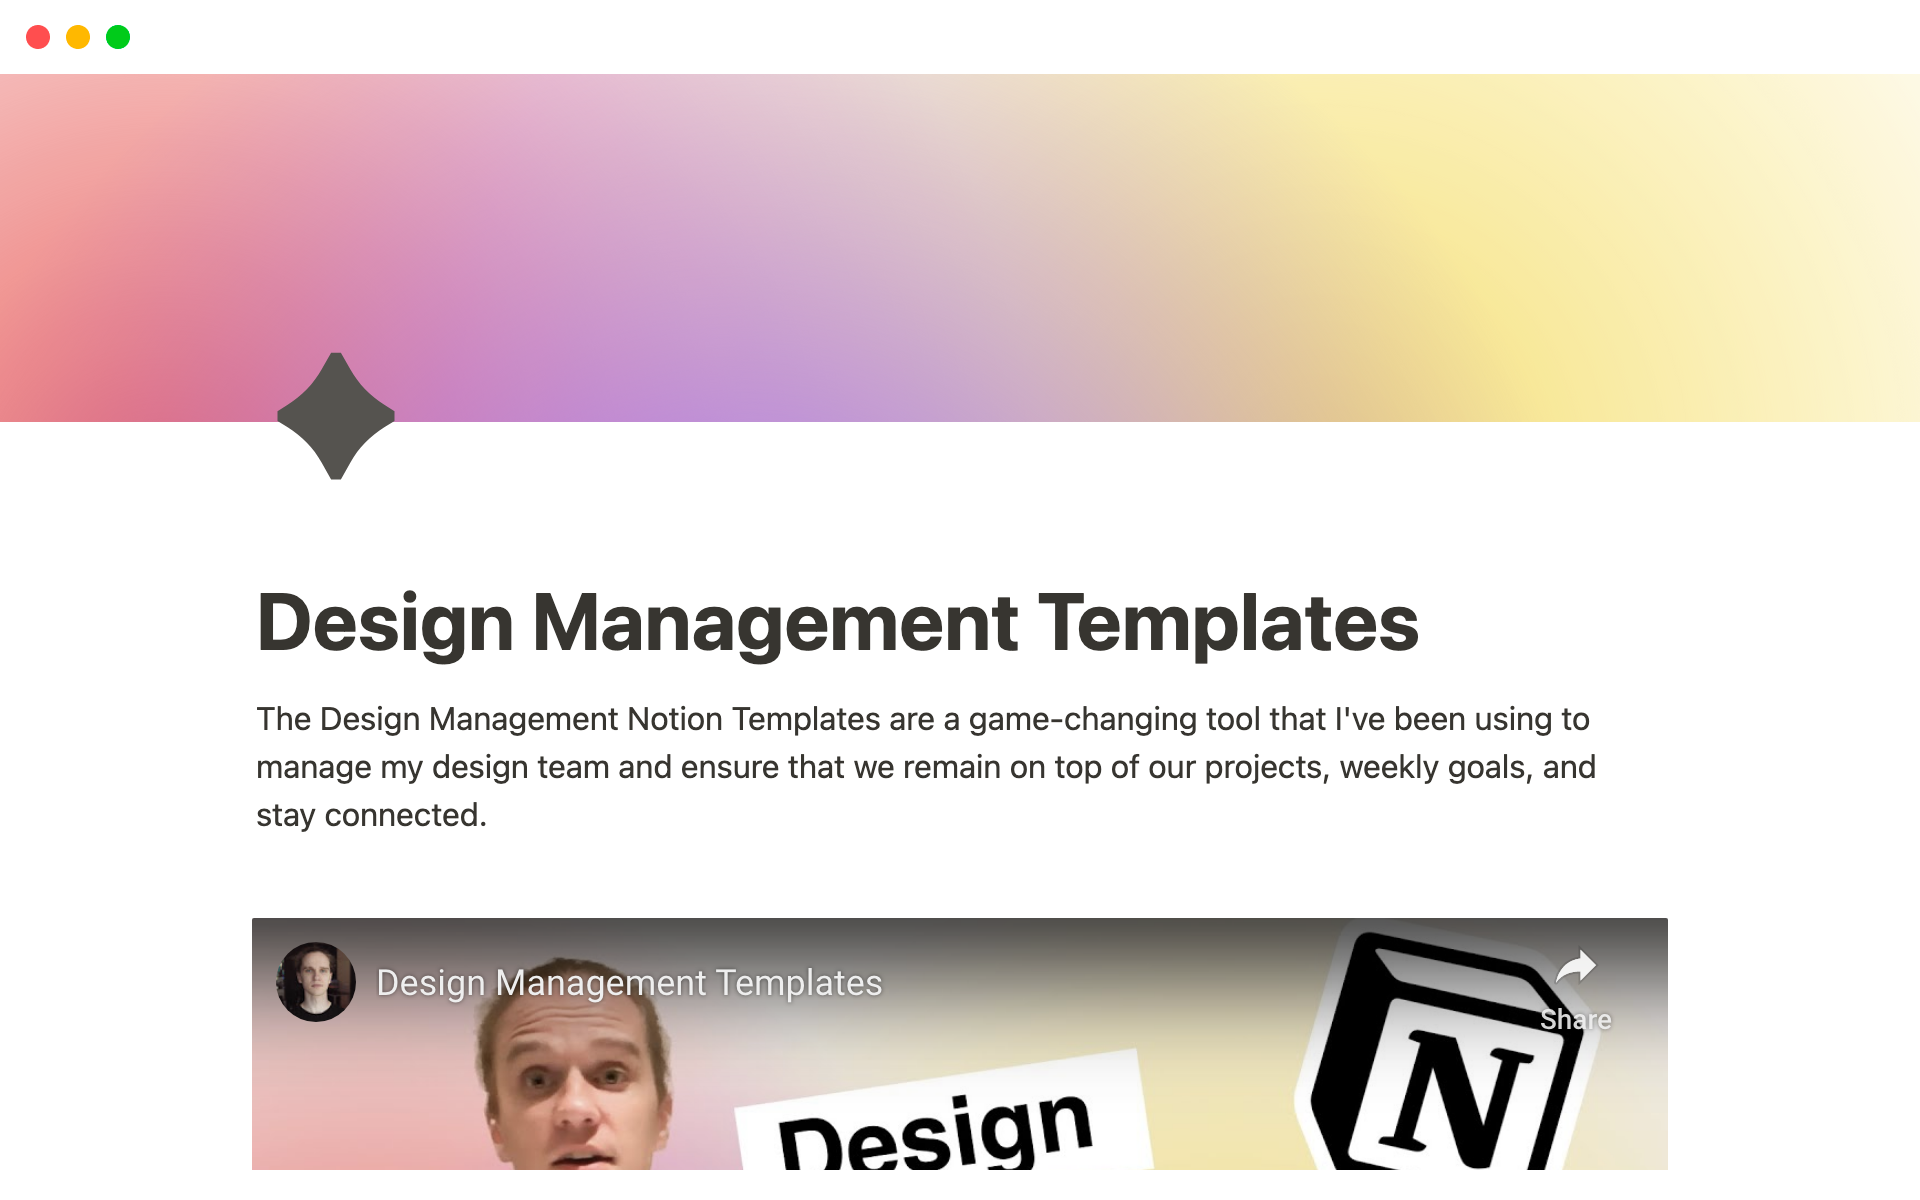 The Design Management Notion Templates are a game-changing tool that I've been using to manage my design team and ensure that we remain on top of our projects, weekly goals, and stay connected.